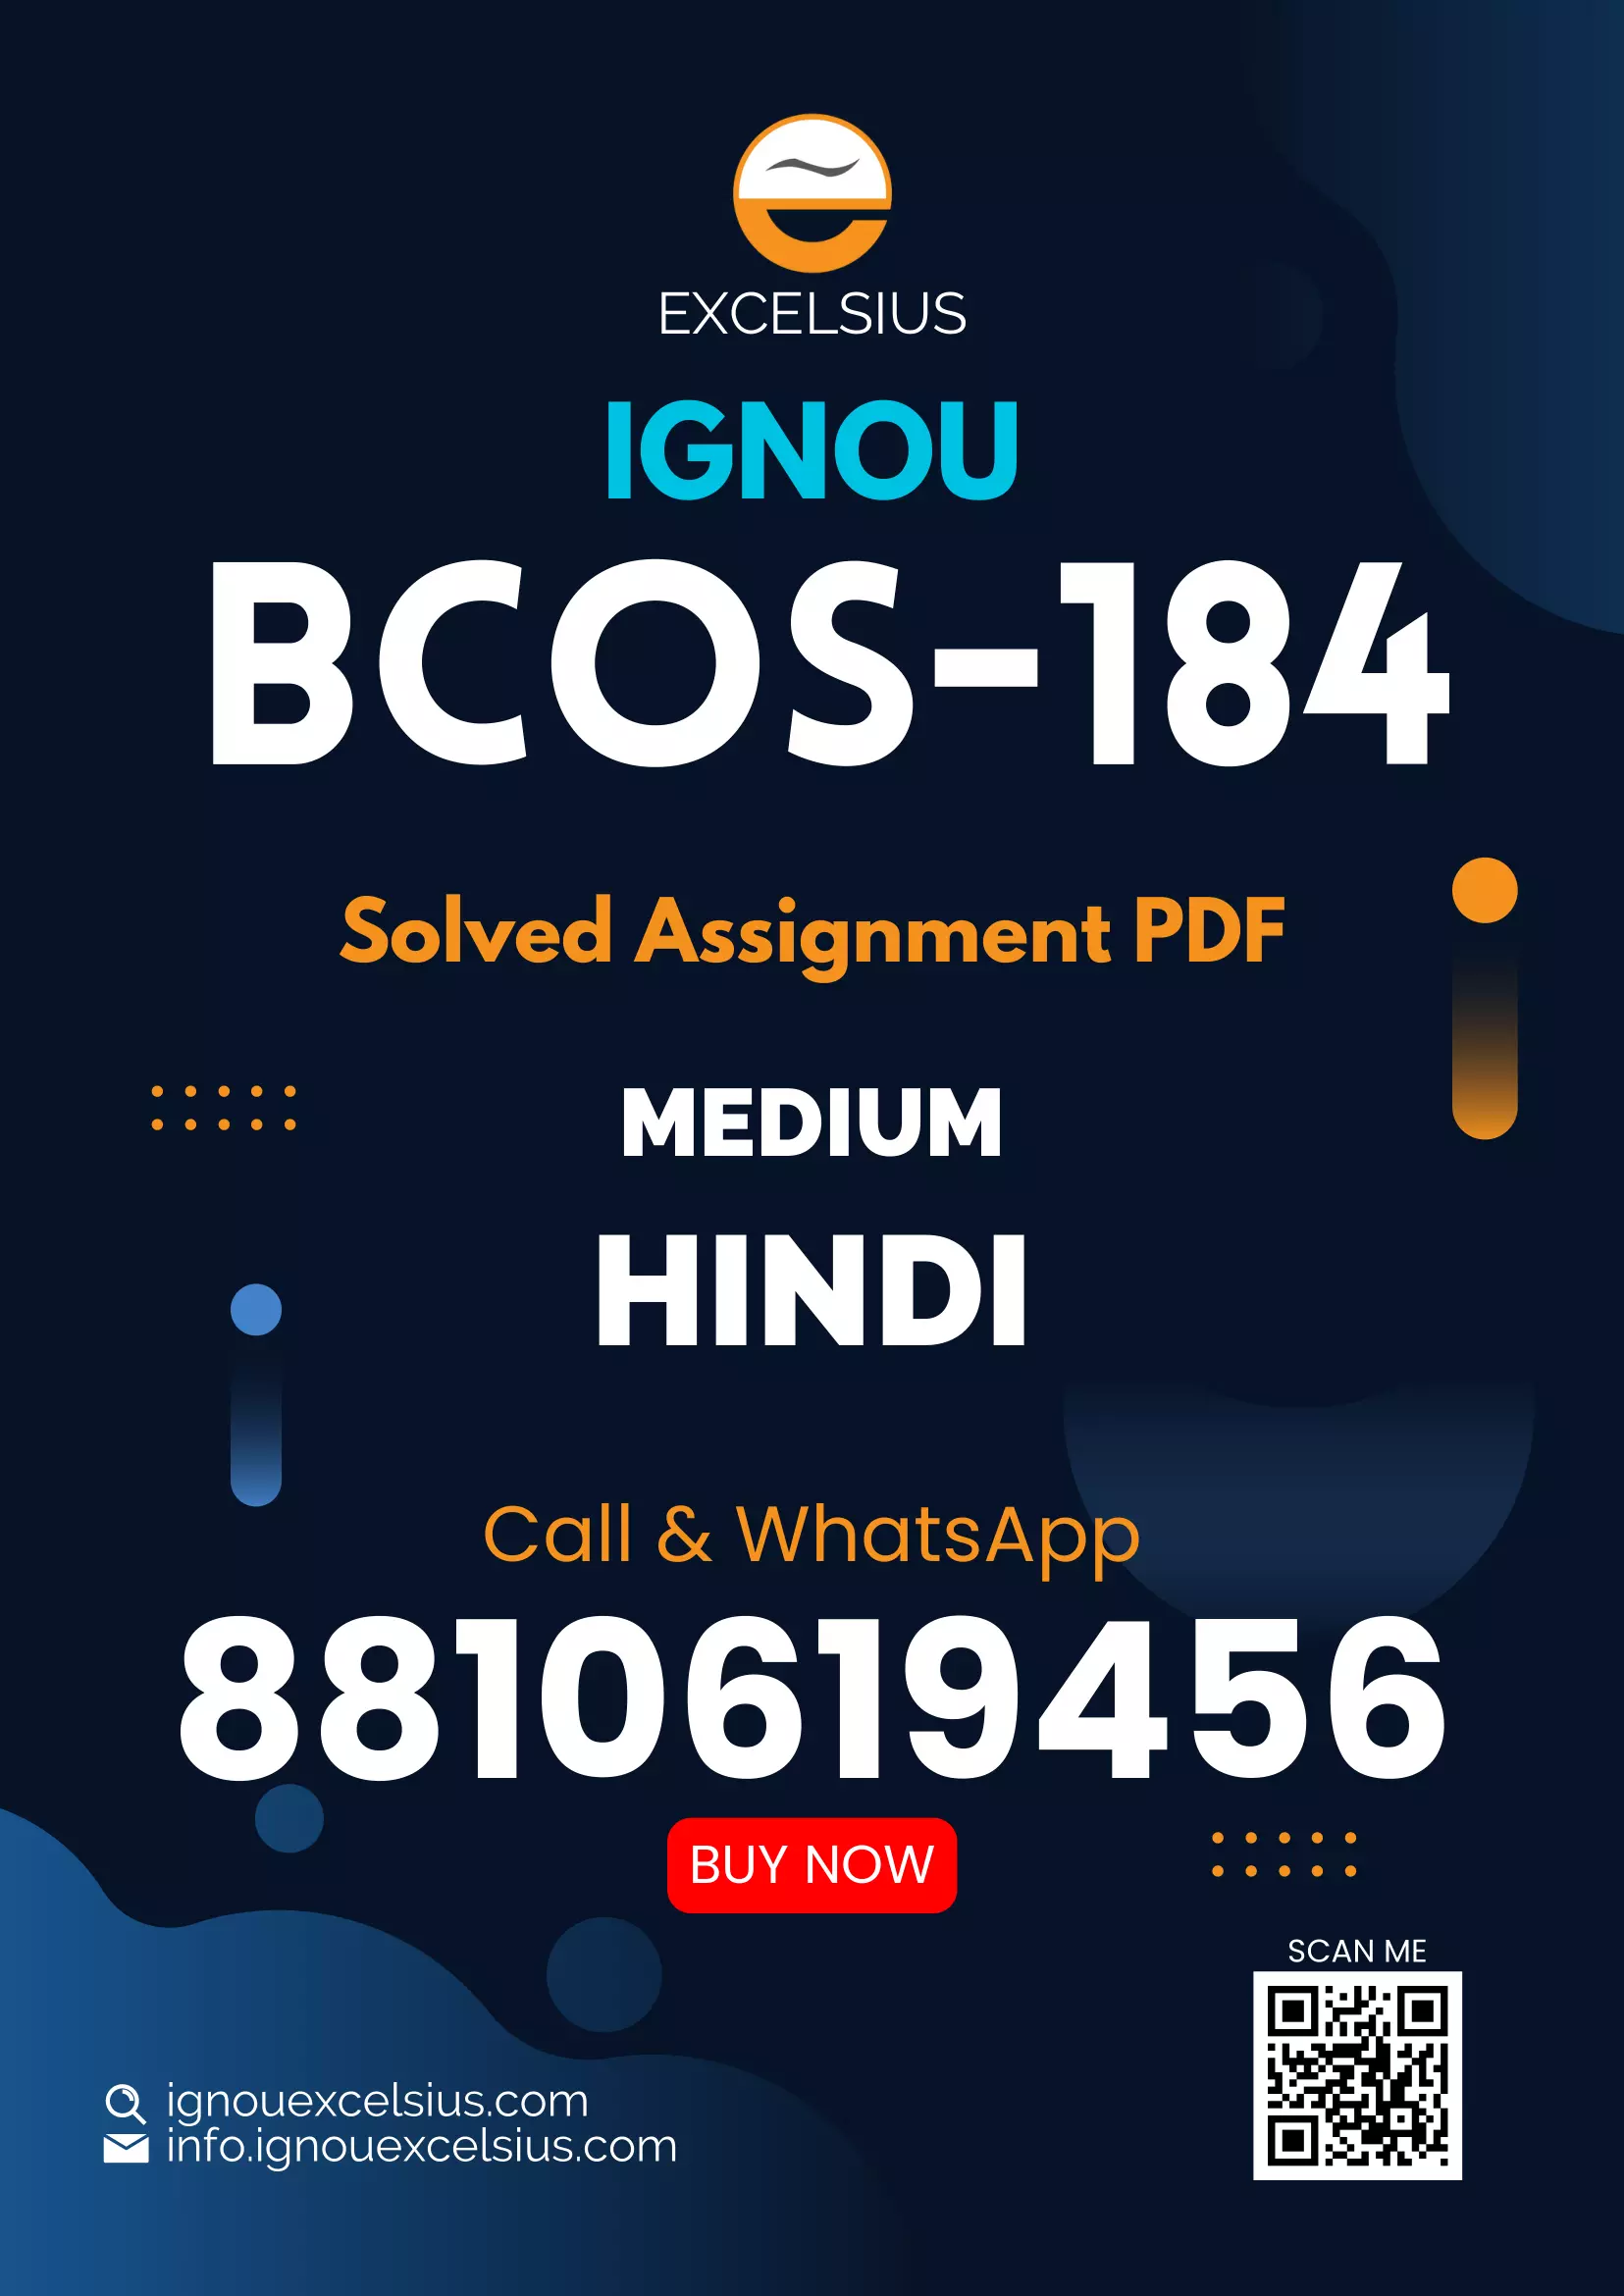 IGNOU BCOS-184 - E-Commerce, Latest Solved Assignment-July 2022 – January 2023